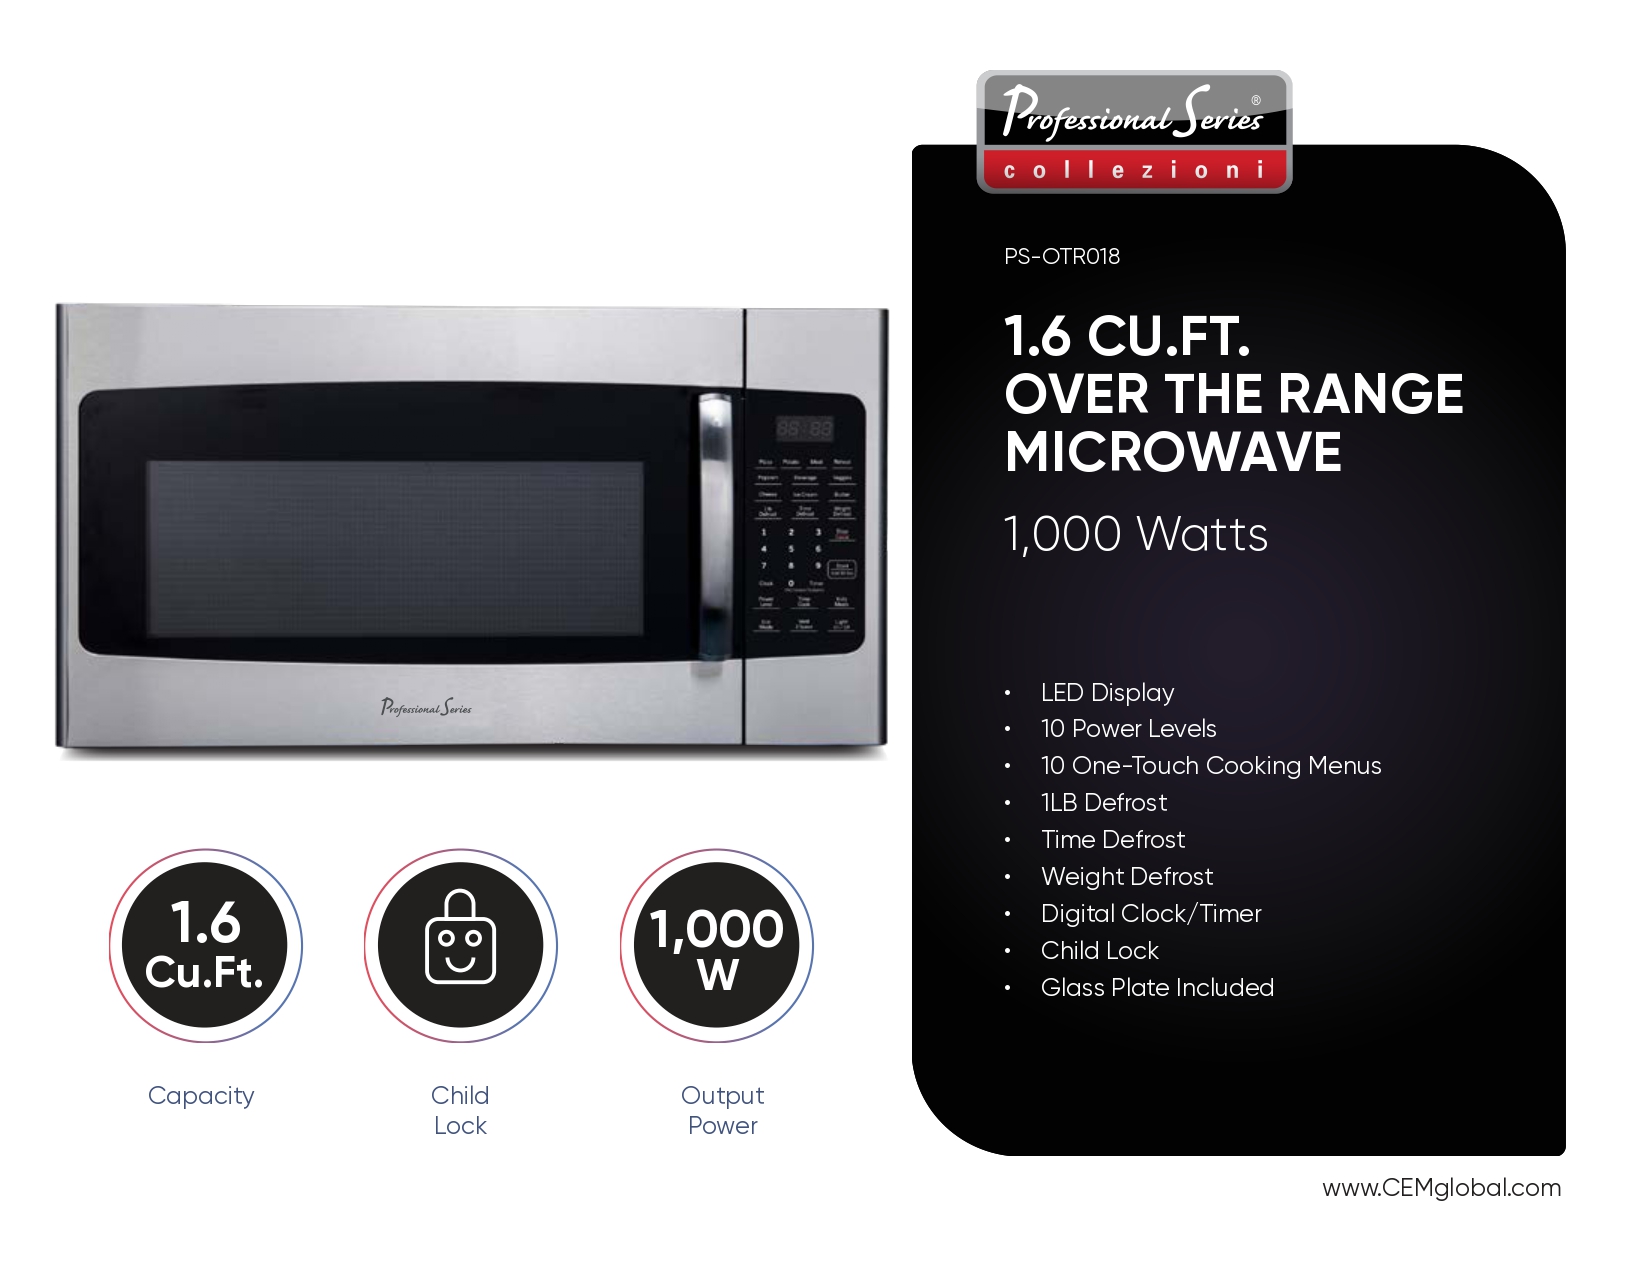 1.6 CU.FT. OVER THE RANGE MICROWAVE